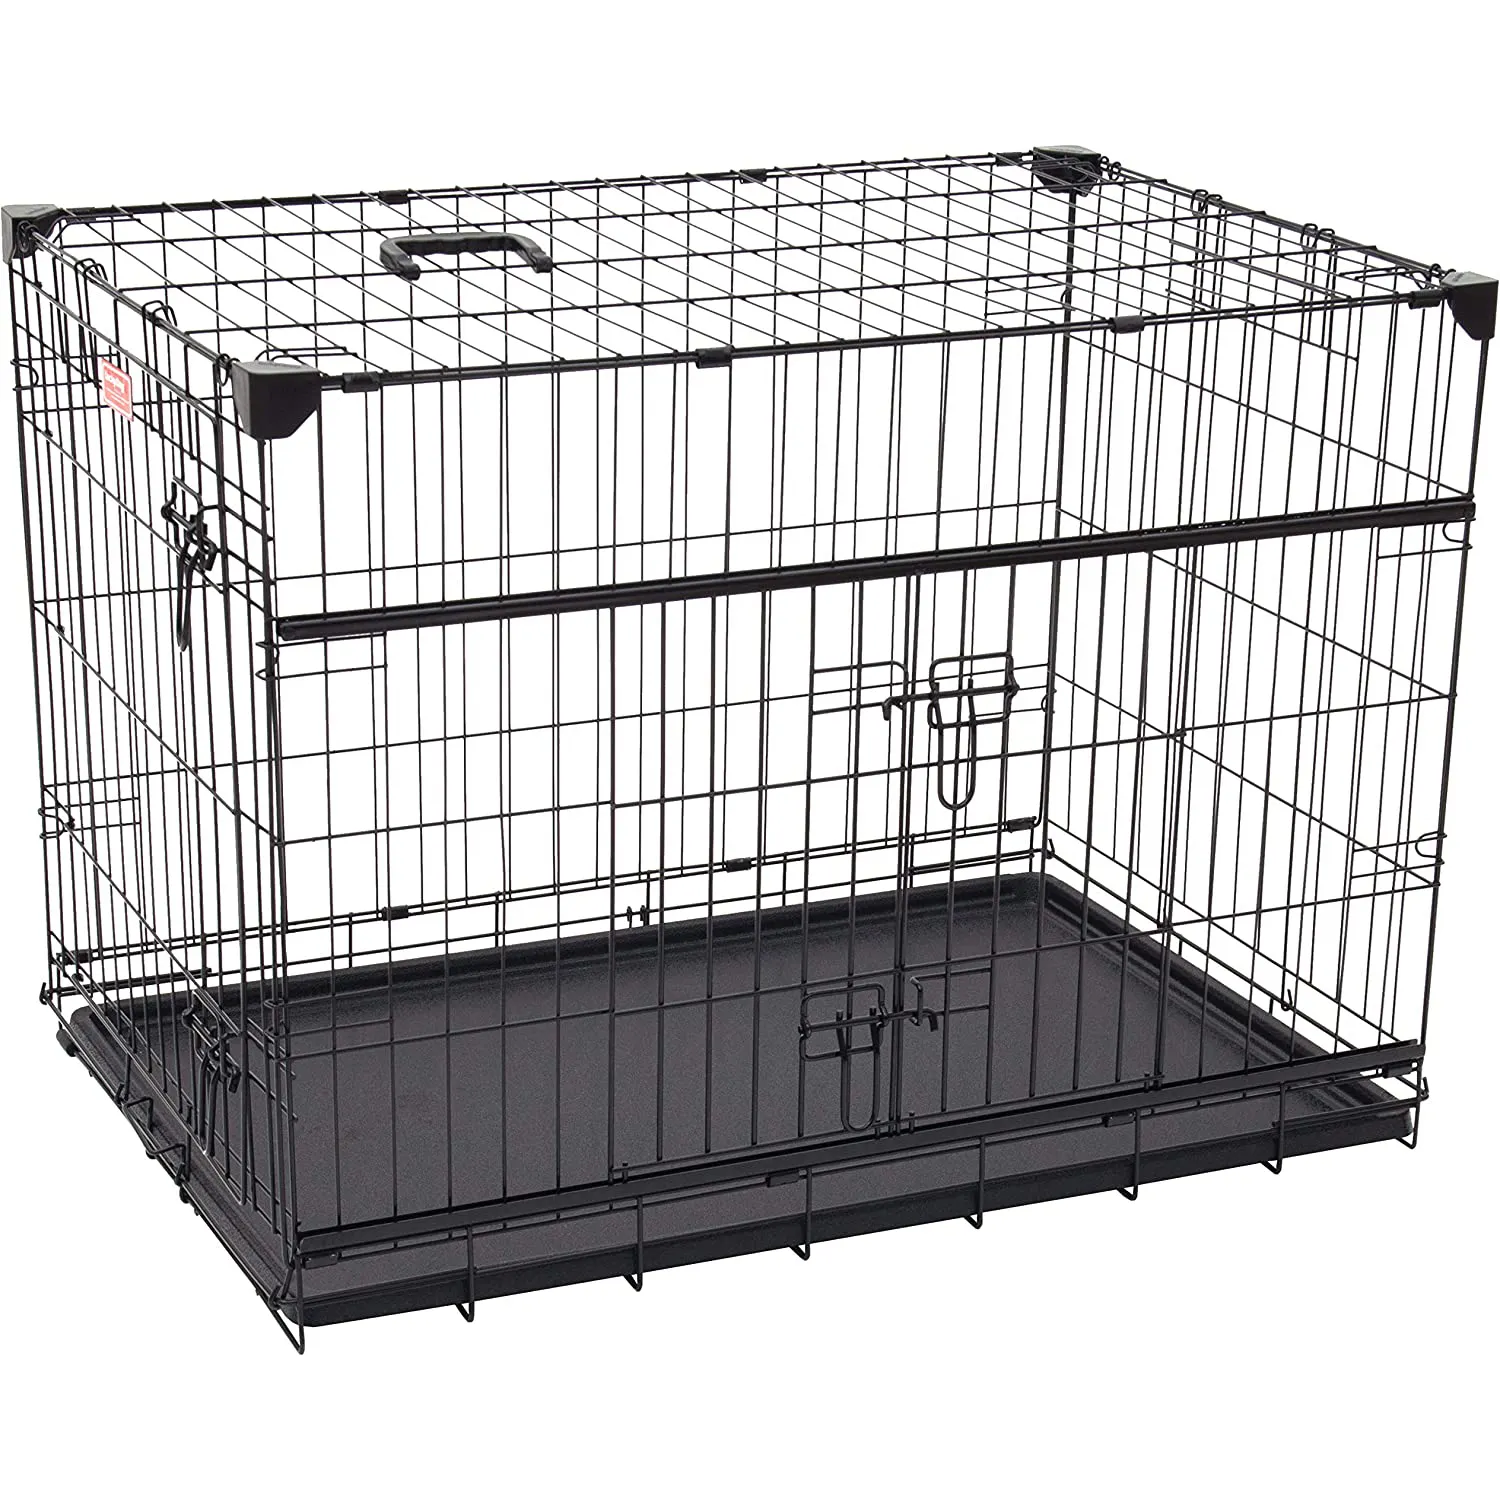 Wholesale Manufacturer 30 36 42 48 Inch Metal Foldable Dog Crates Cage,Metal Folding Dog Cage XXL Black Impact Dog Kennel Crate